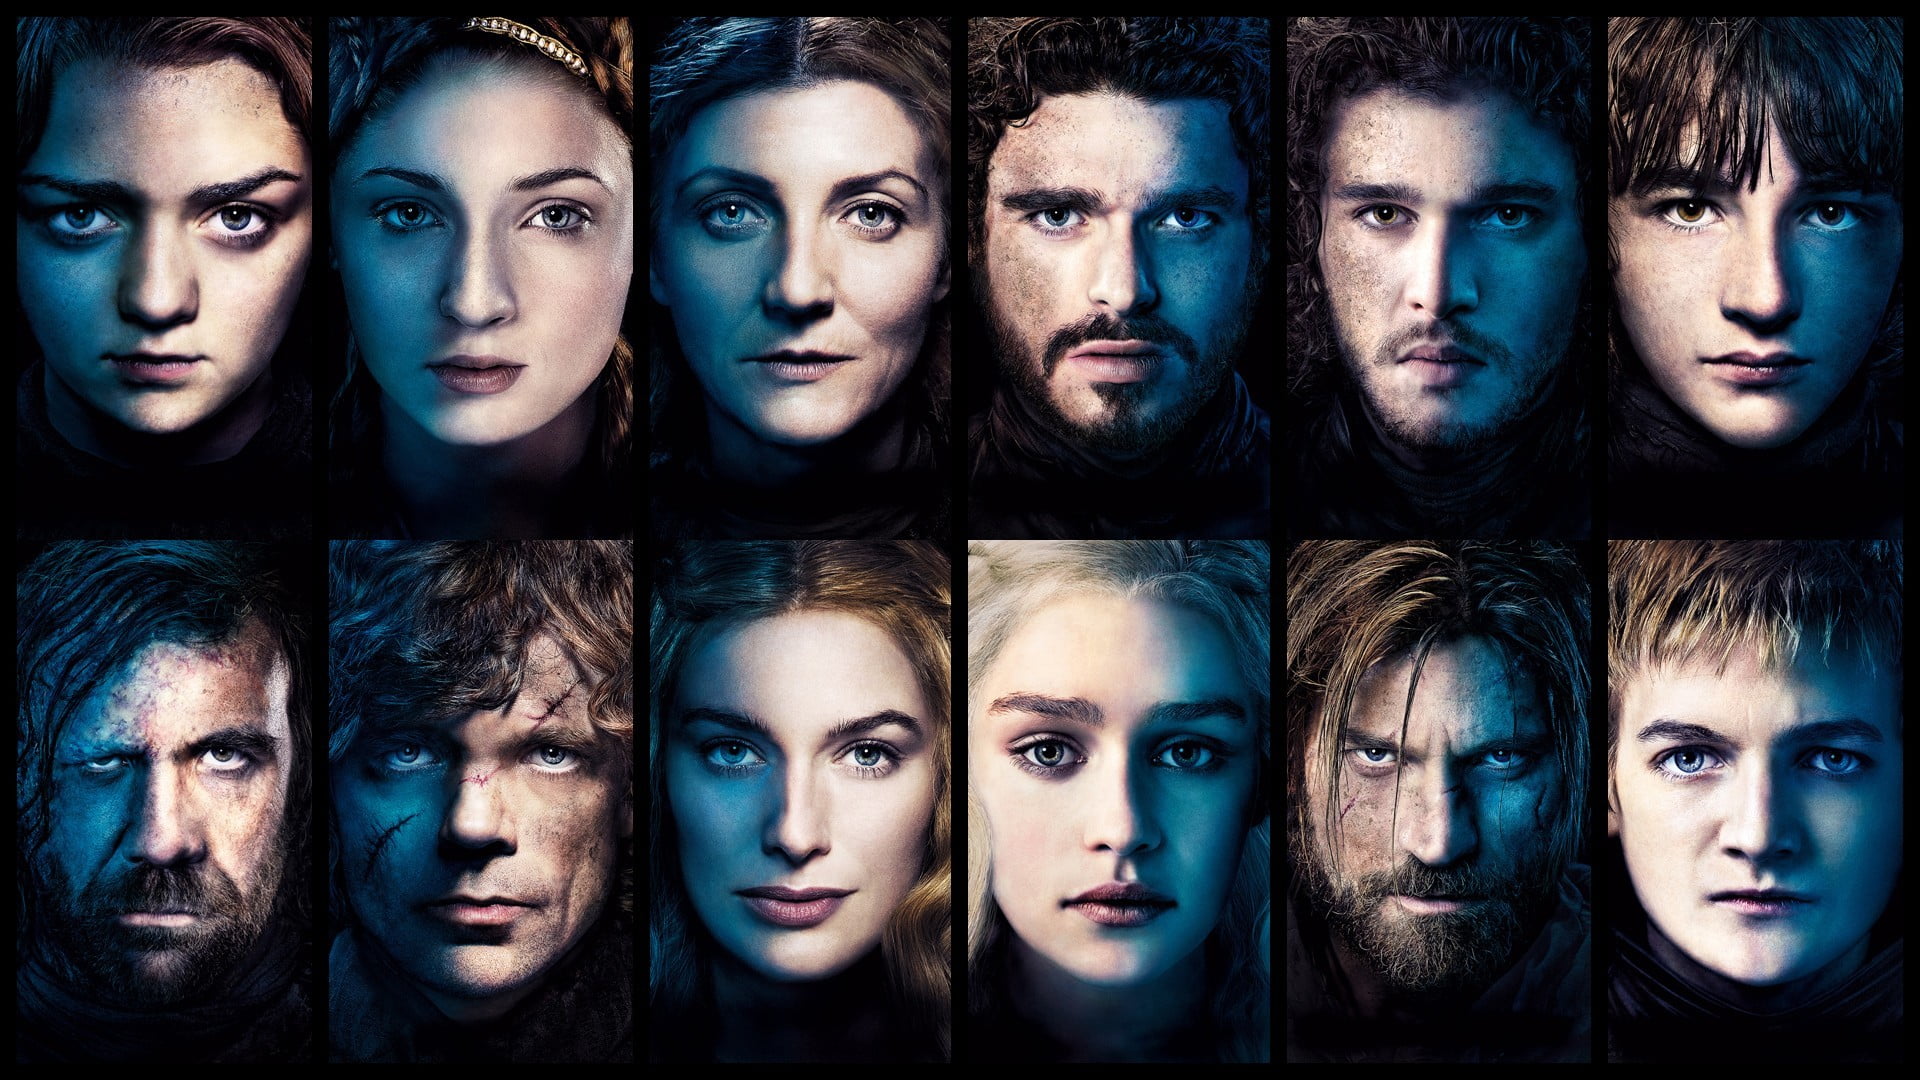 Game of Throne character portrait collage photo, anime, Game of Thrones